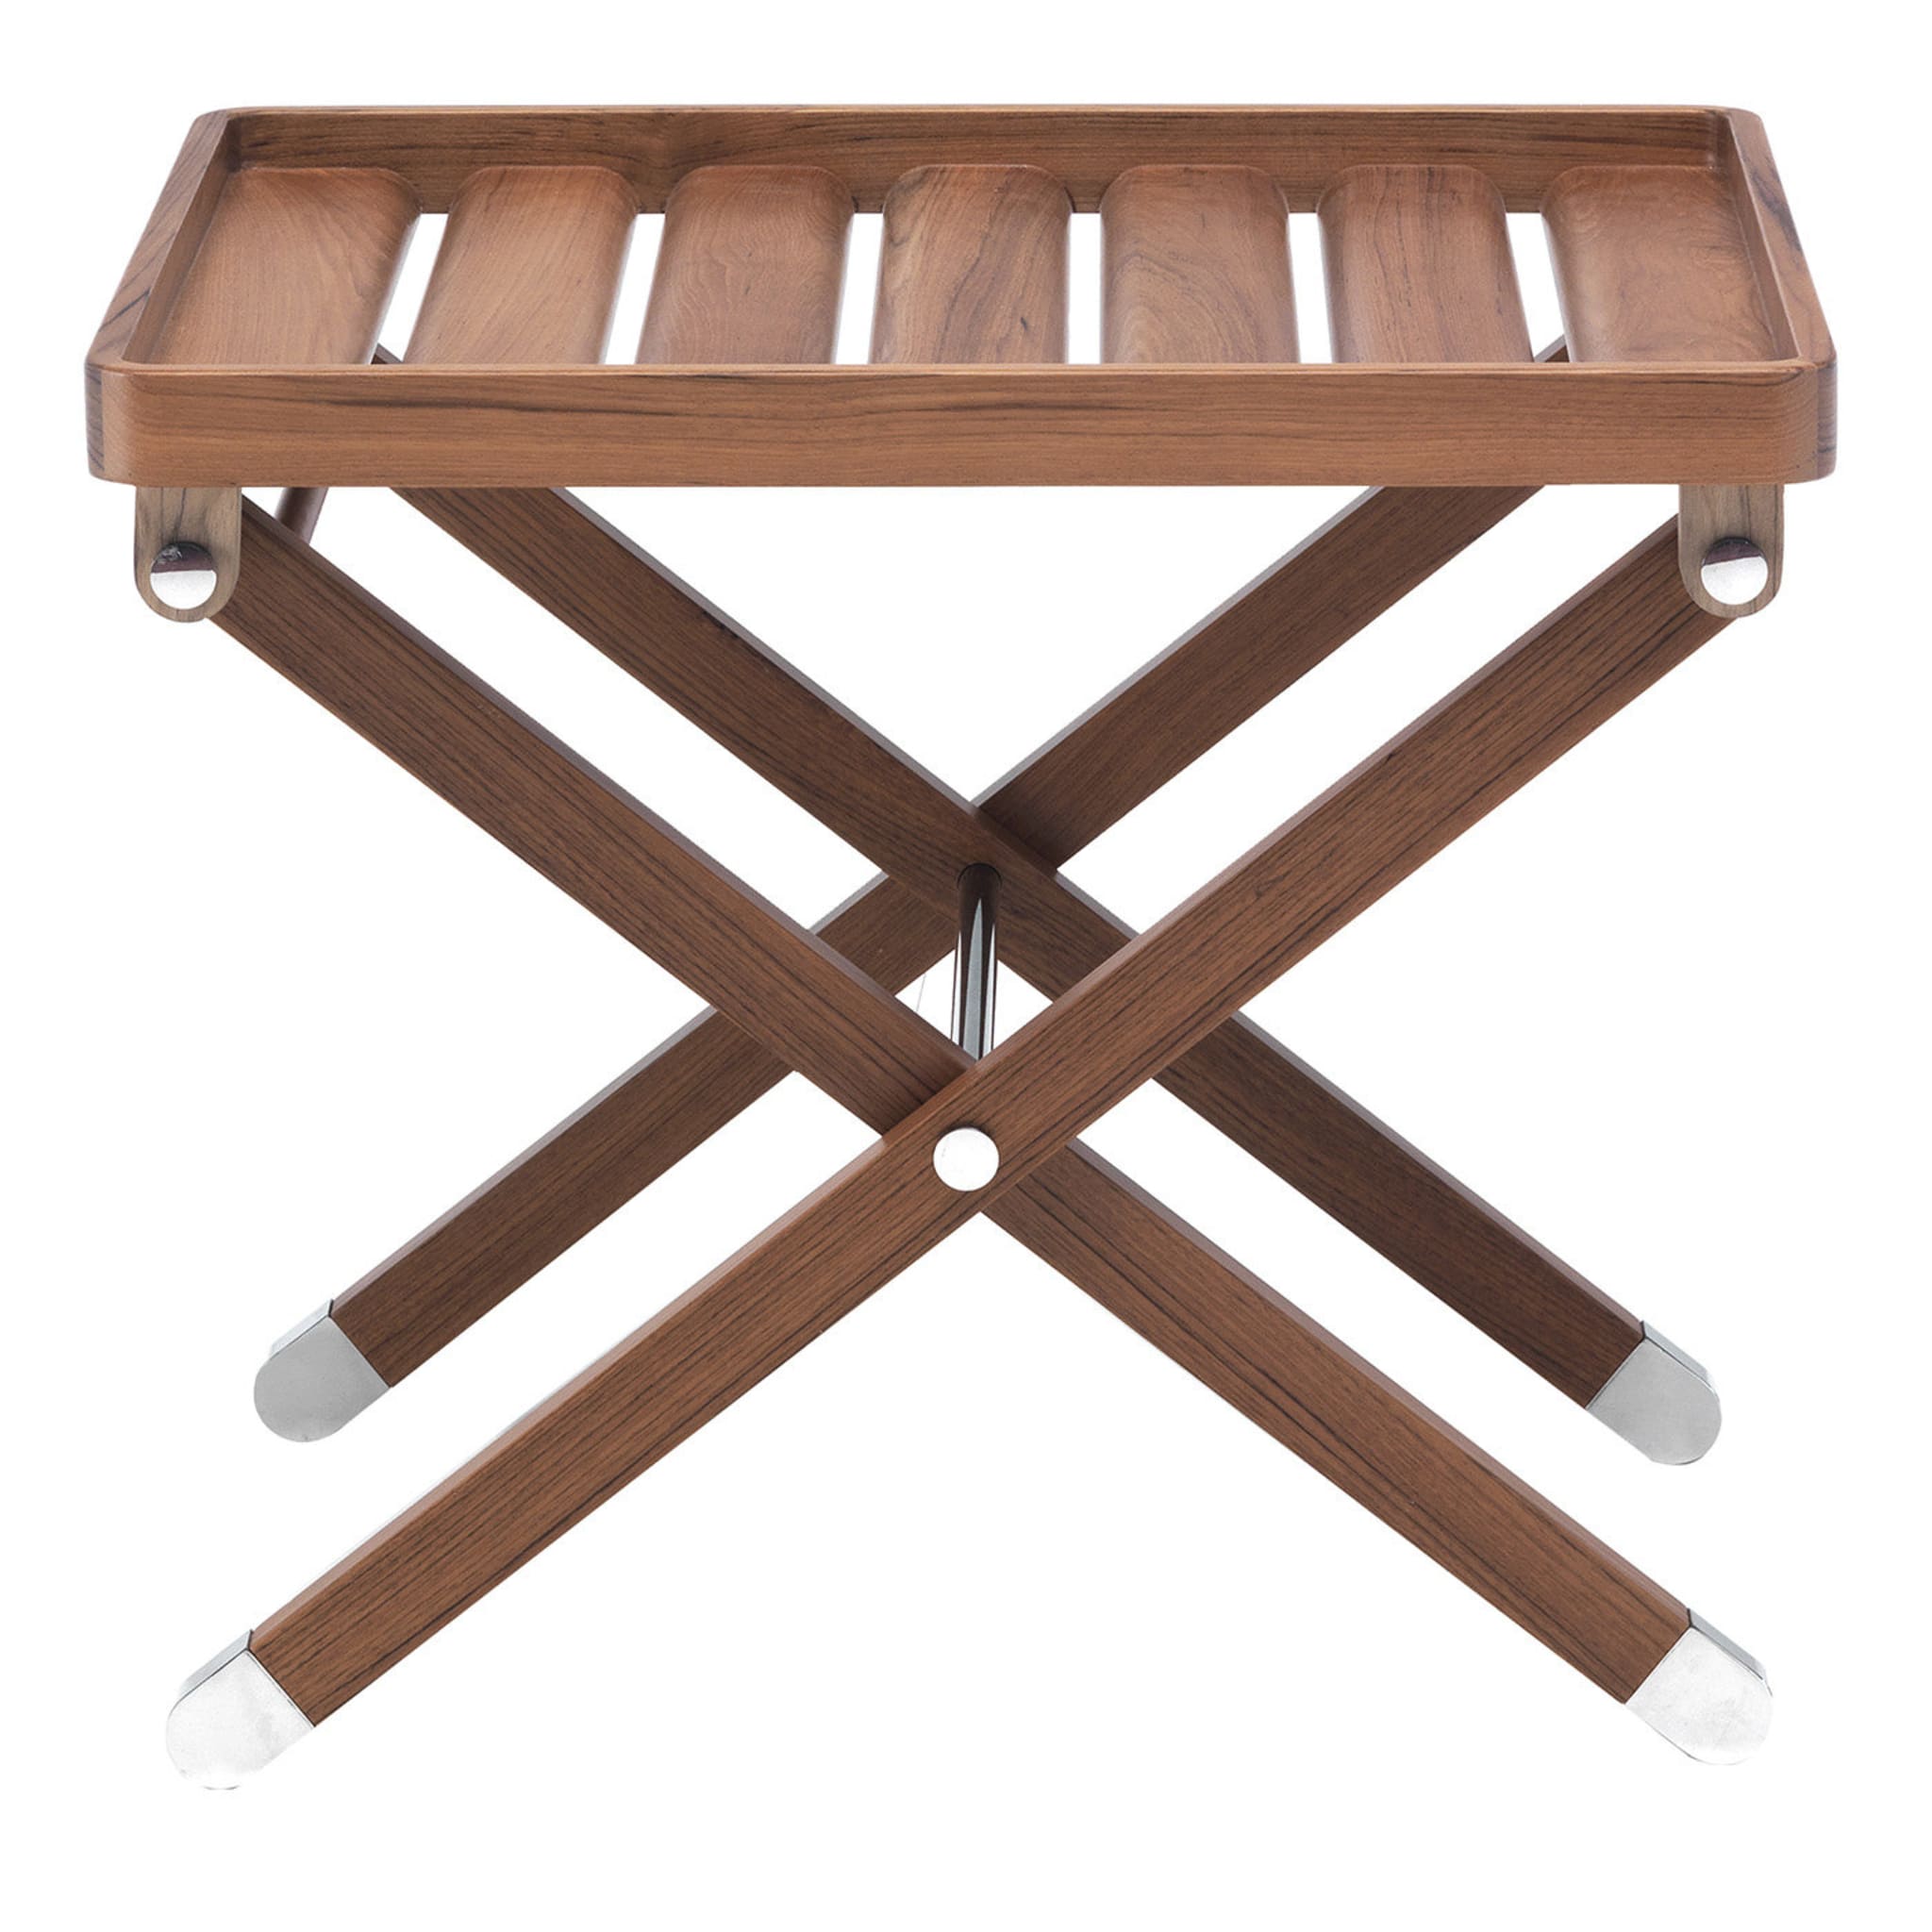 Teak Folding Table by Simone Ciarmoli and Miguel Queda - Main view